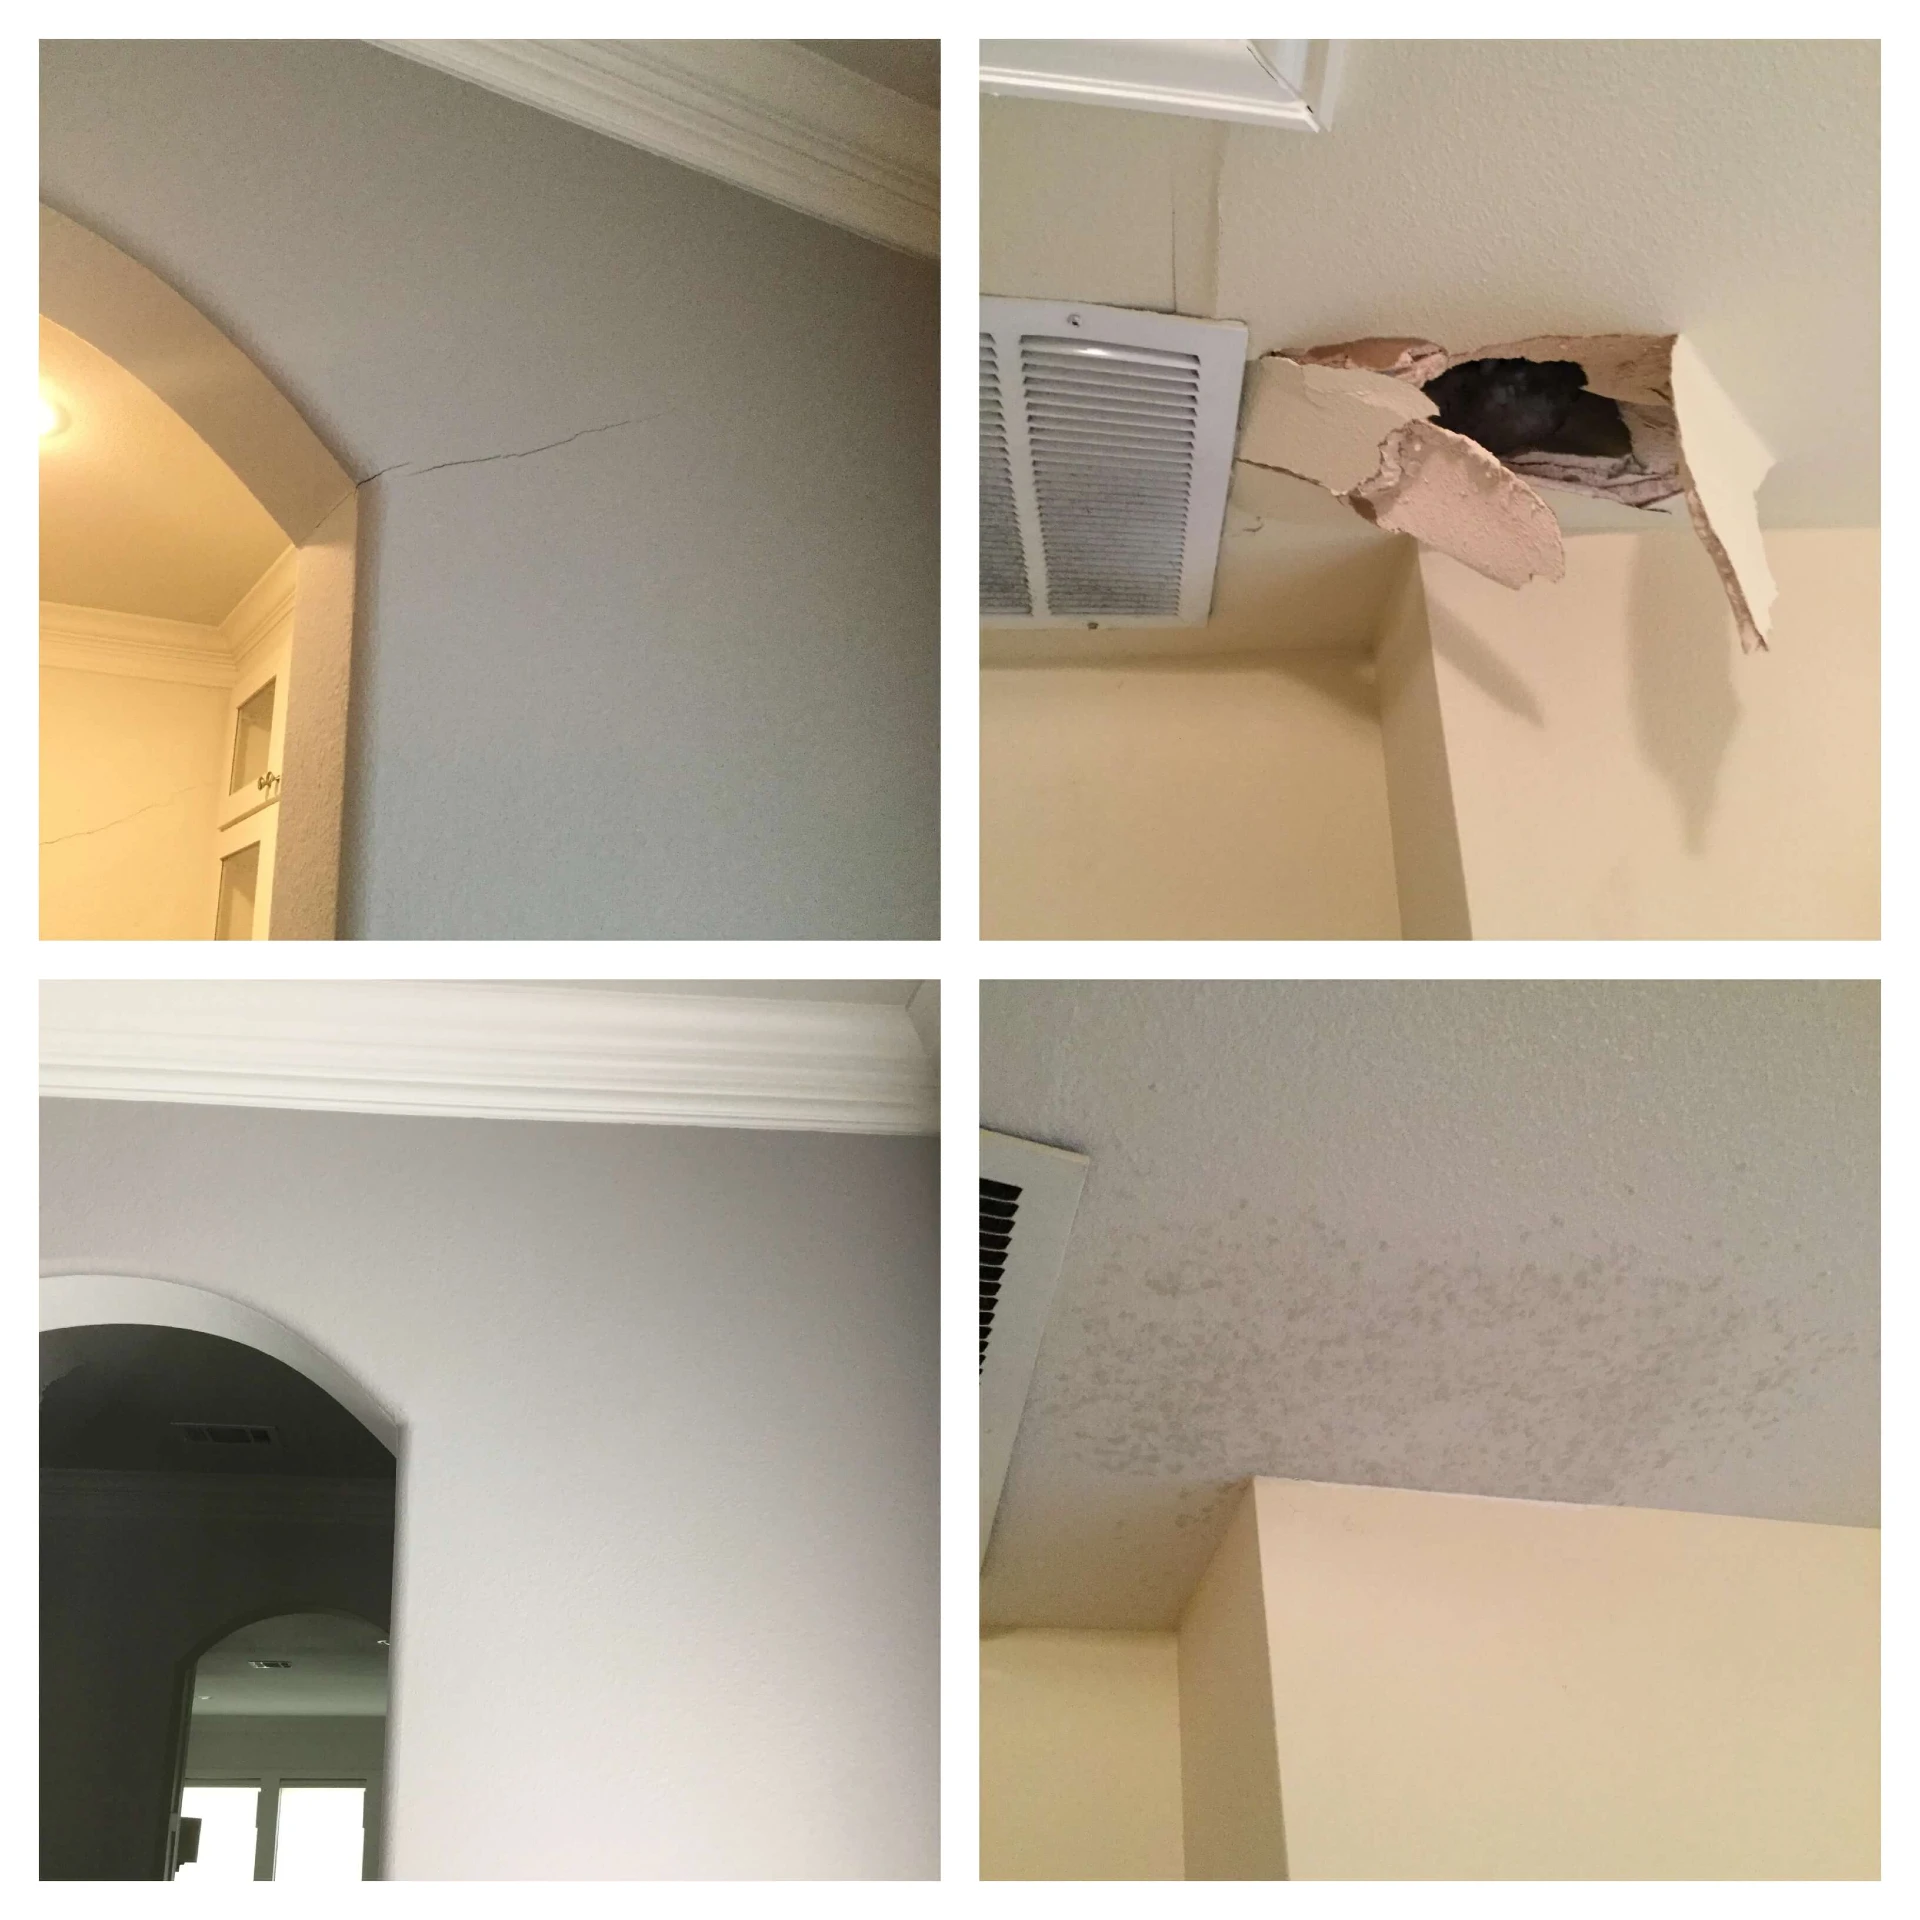 A cracked wall and a ceiling with a hole in it before and after they have been repaired by Mr. Handyman.